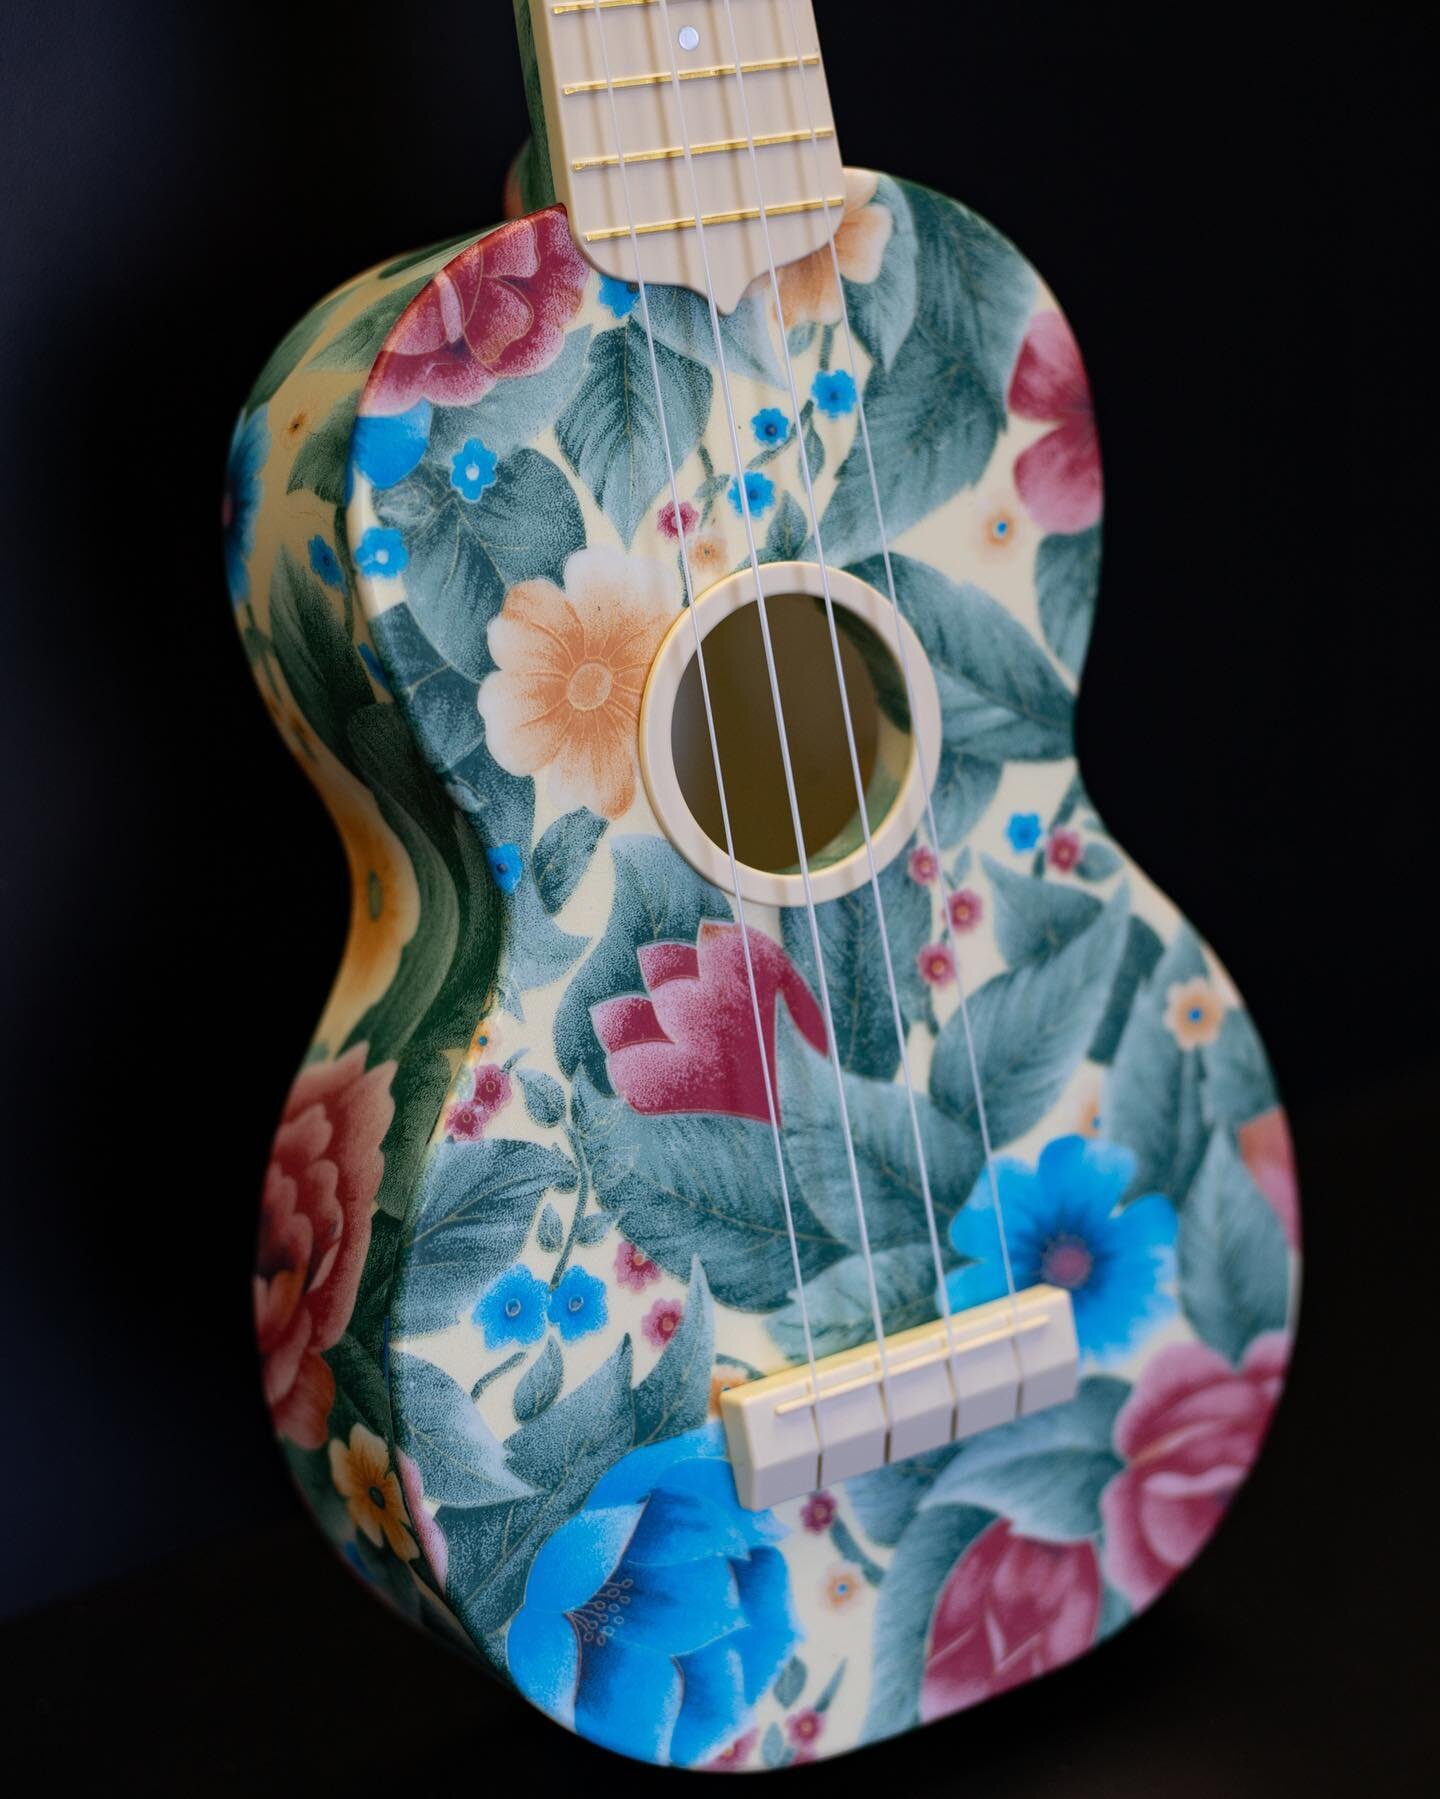 Happy Aloha Friday! 🌺 We have been busy adding more models to our new online store, including a wide variety of amazing Starter Ukuleles. Our plastic starter ukuleles, like this floral one, are absolutely ideal for little keiki~ but we also have man